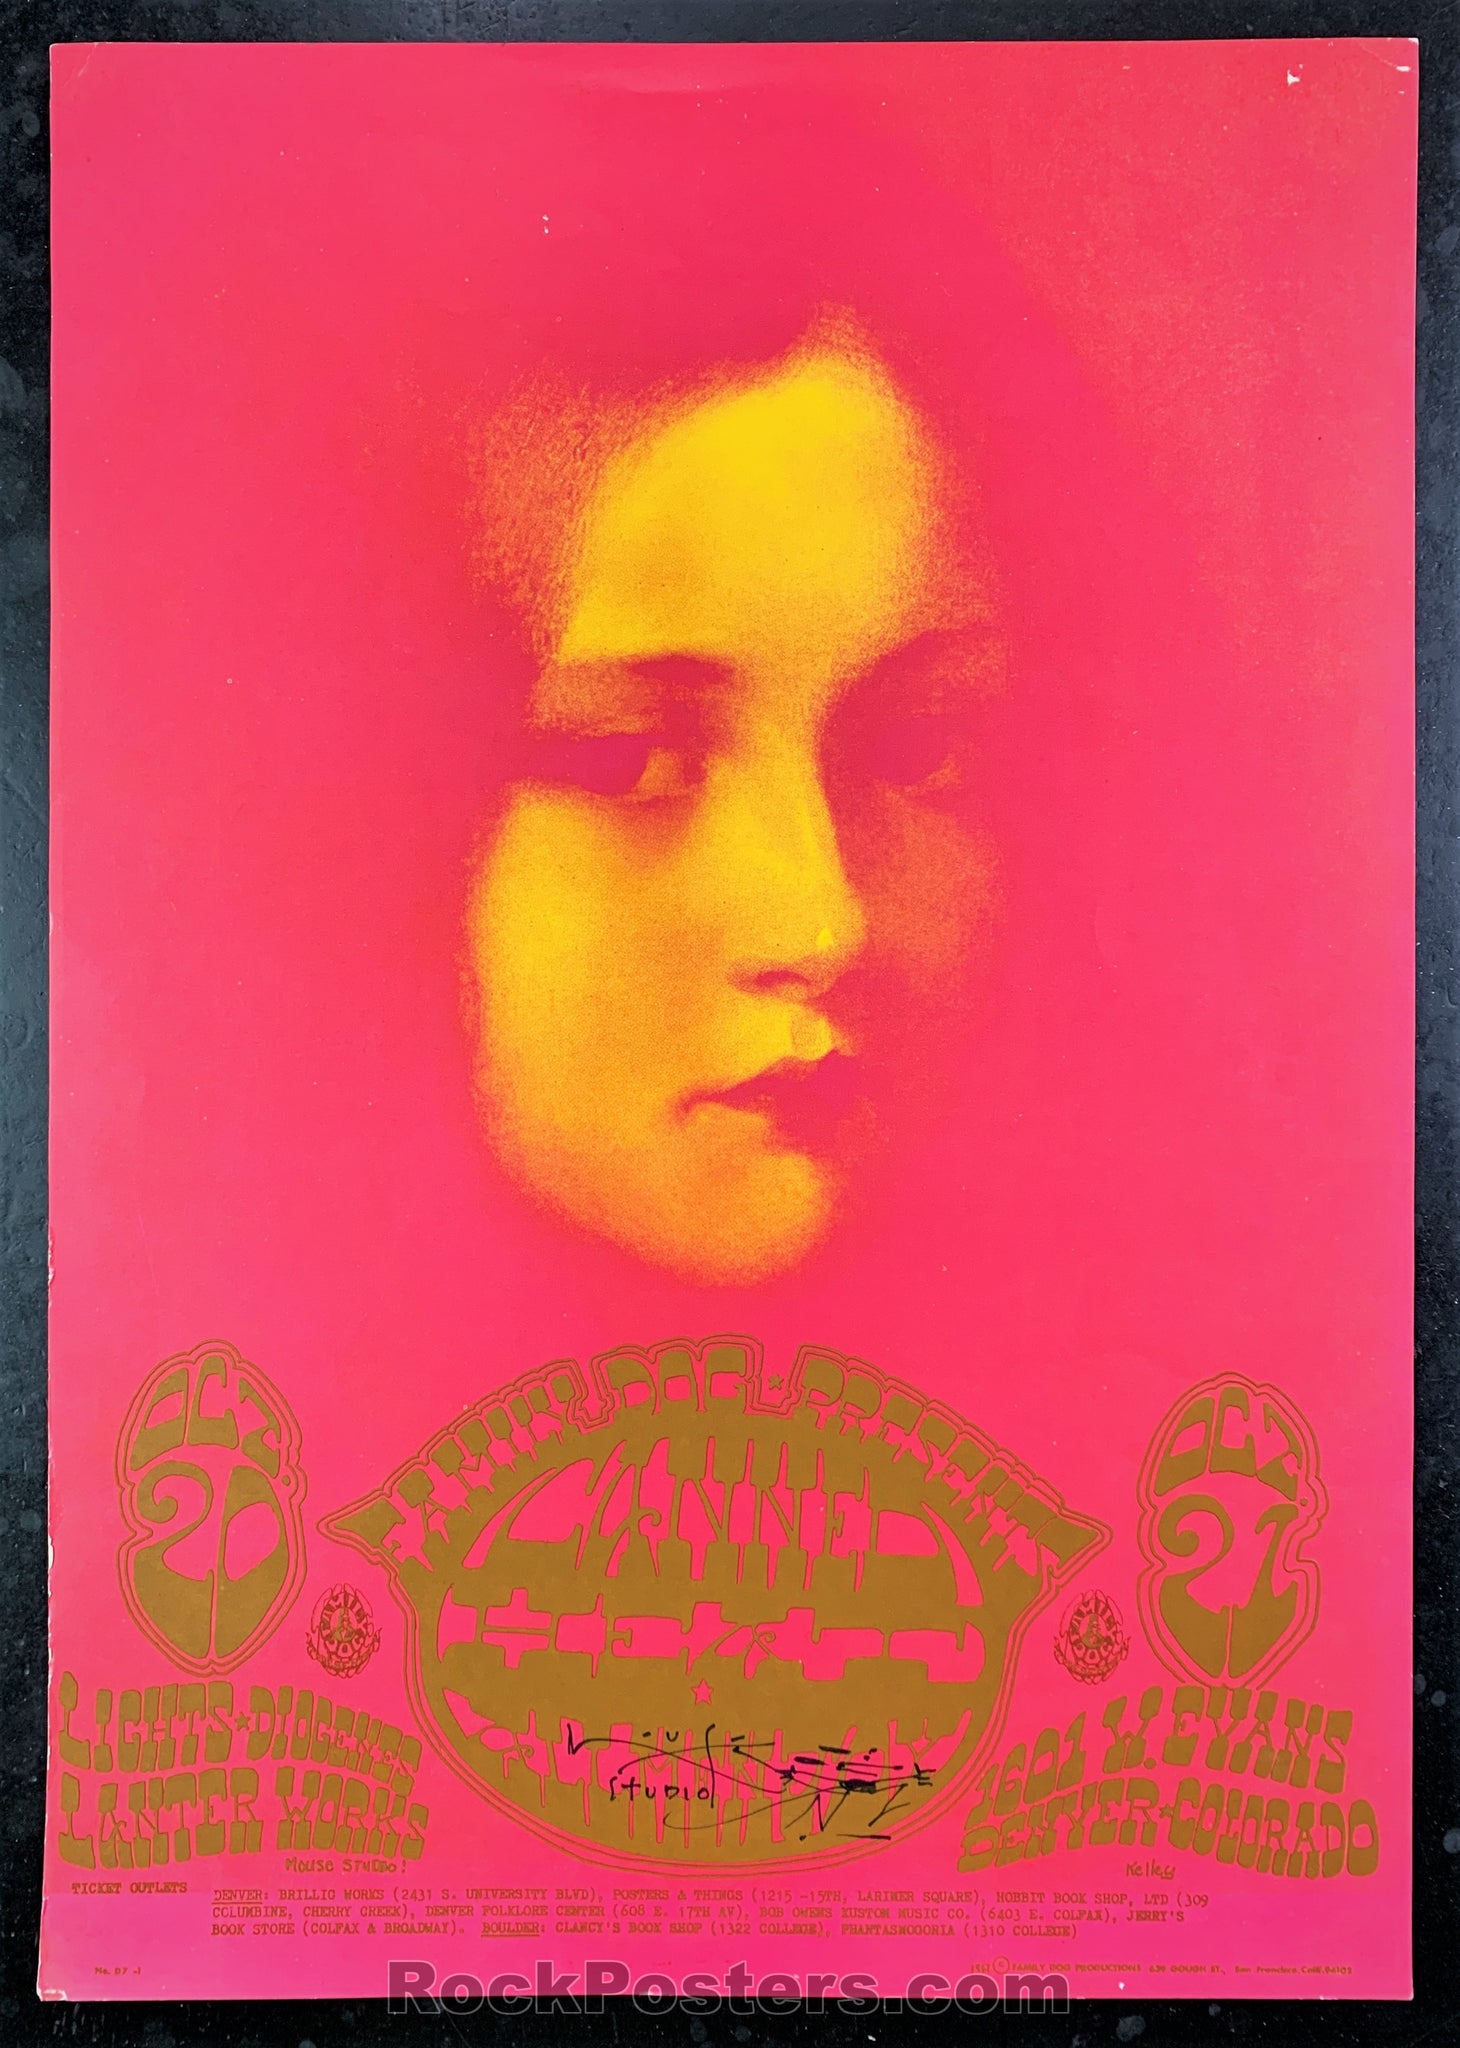 AUCTION - FDD-7 - Canned Heat Moonchild - Original Mouse Signed Poster - Avalon Ballroom - Excellent Poster 